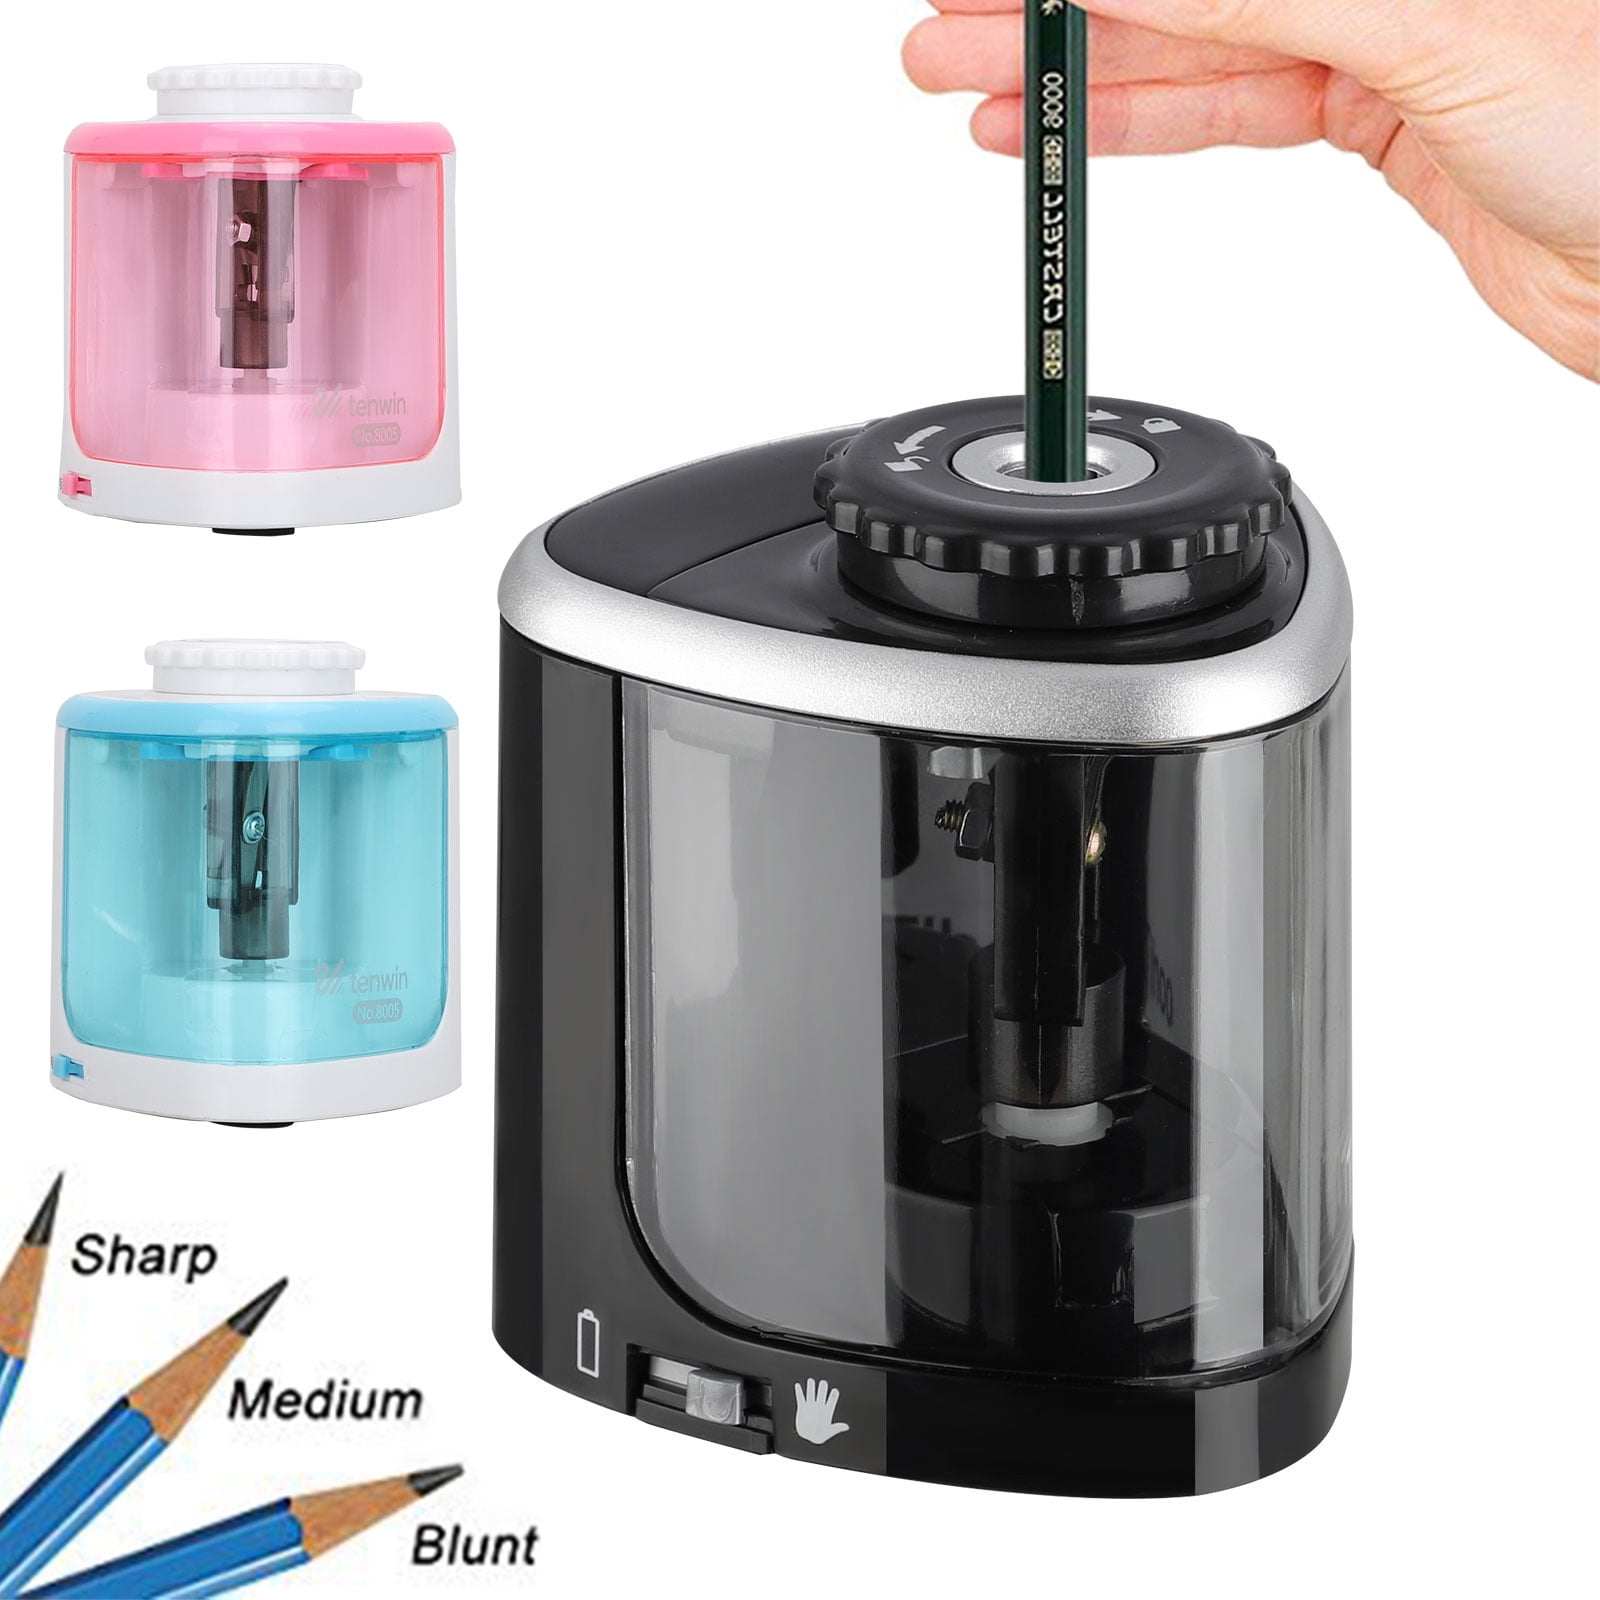 Ultra-Portable Pencil Sharpener Pencil and Colored Pencils School Pro Classroom Premium Quality Sharpener Battery Operated and USB Cable Electric Pencil Sharpener 